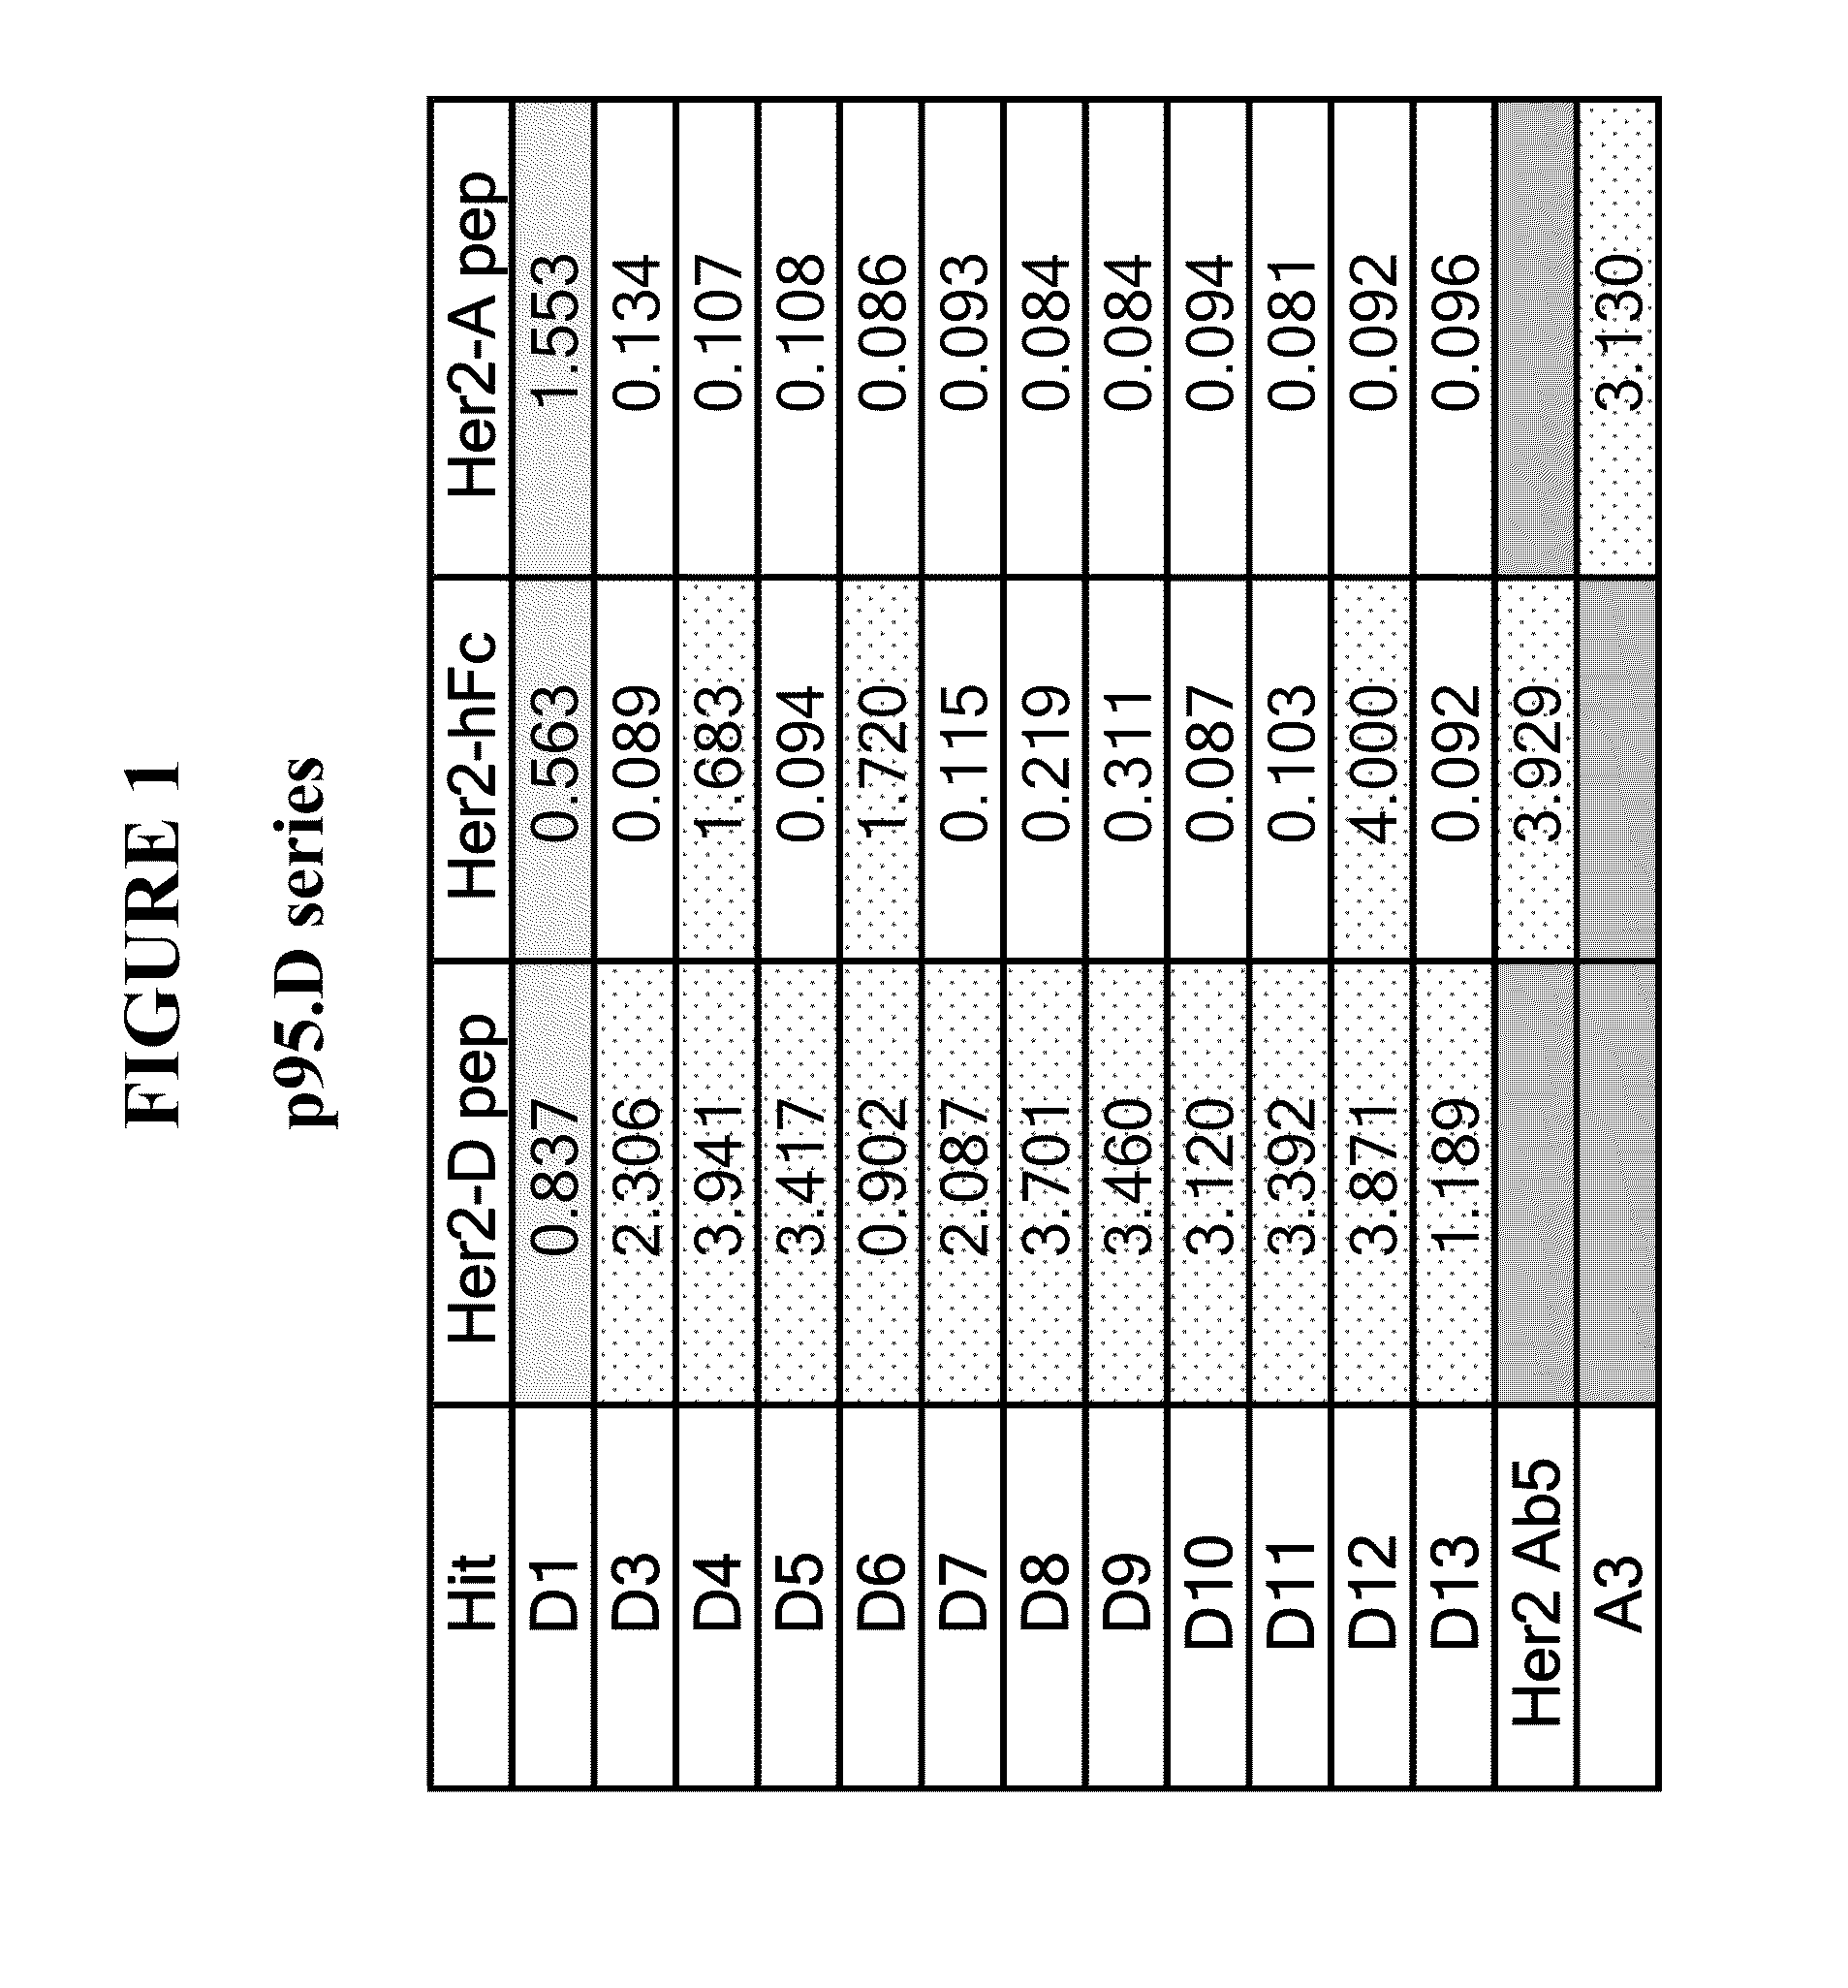 Methods and Assays for Measuring p95 and/or p95 in a Sample and Antibodies Specific for p95